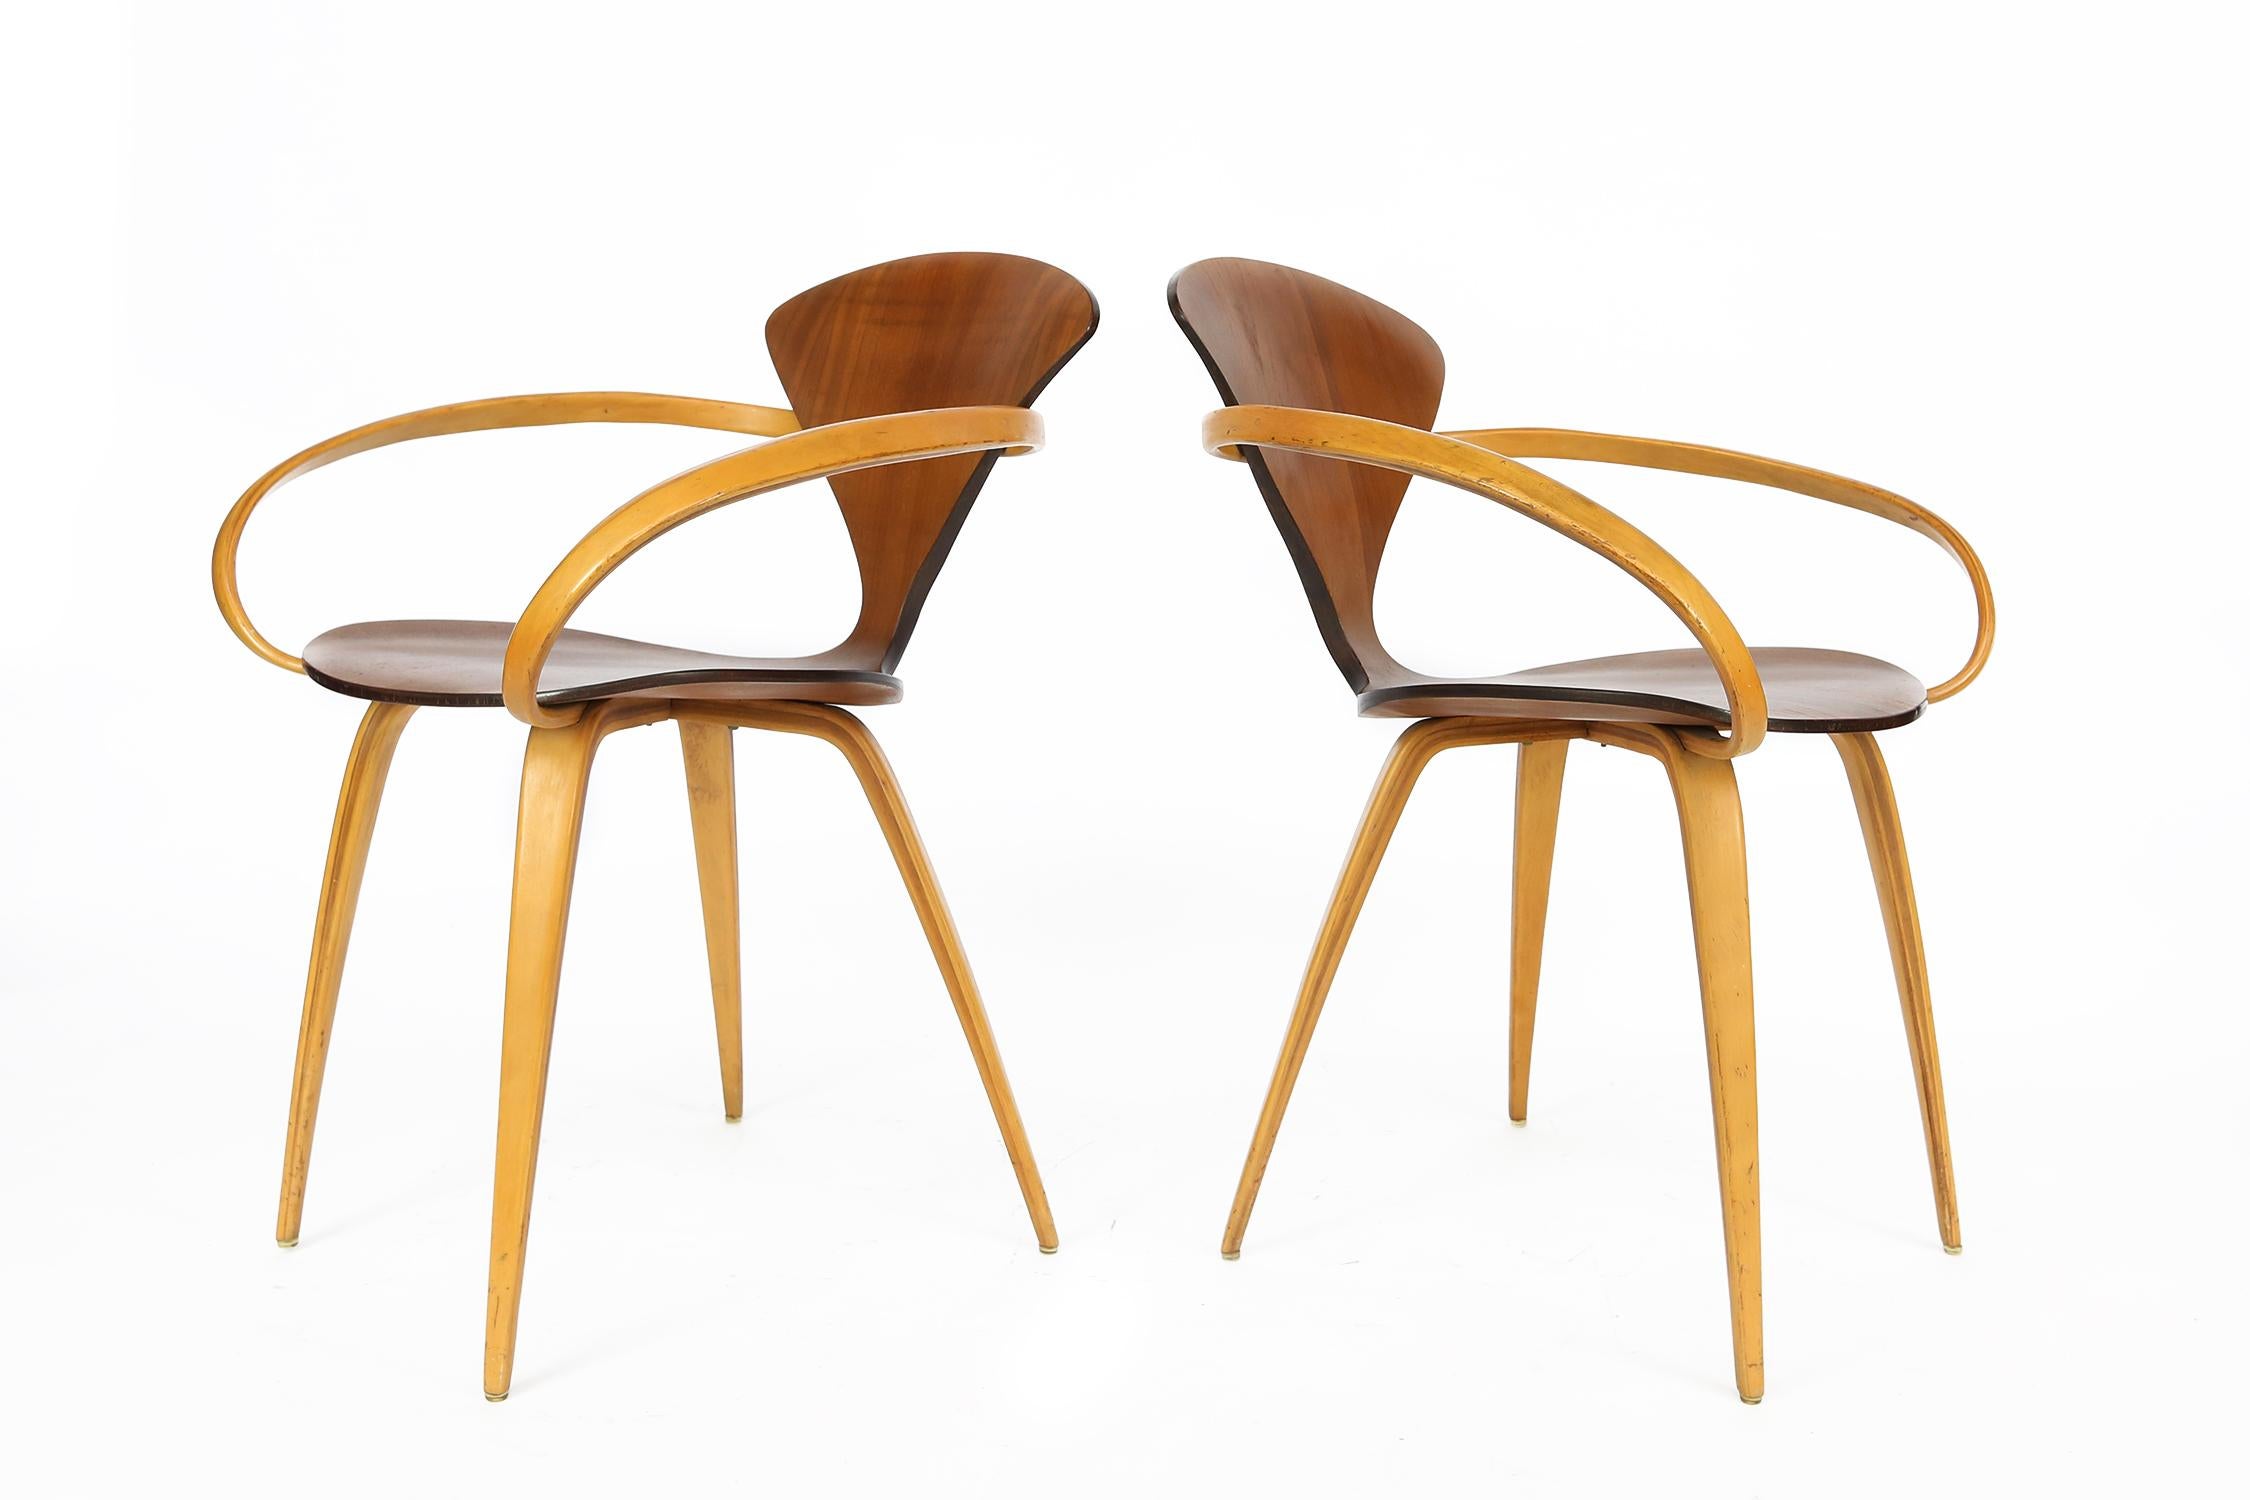 Original Norman Cherner pretzel dining chairs, made by Plycraft, USA in the 1960s. Bentwood frame. Great vintage condition, minor signs of use and wear.
Priced per single chair